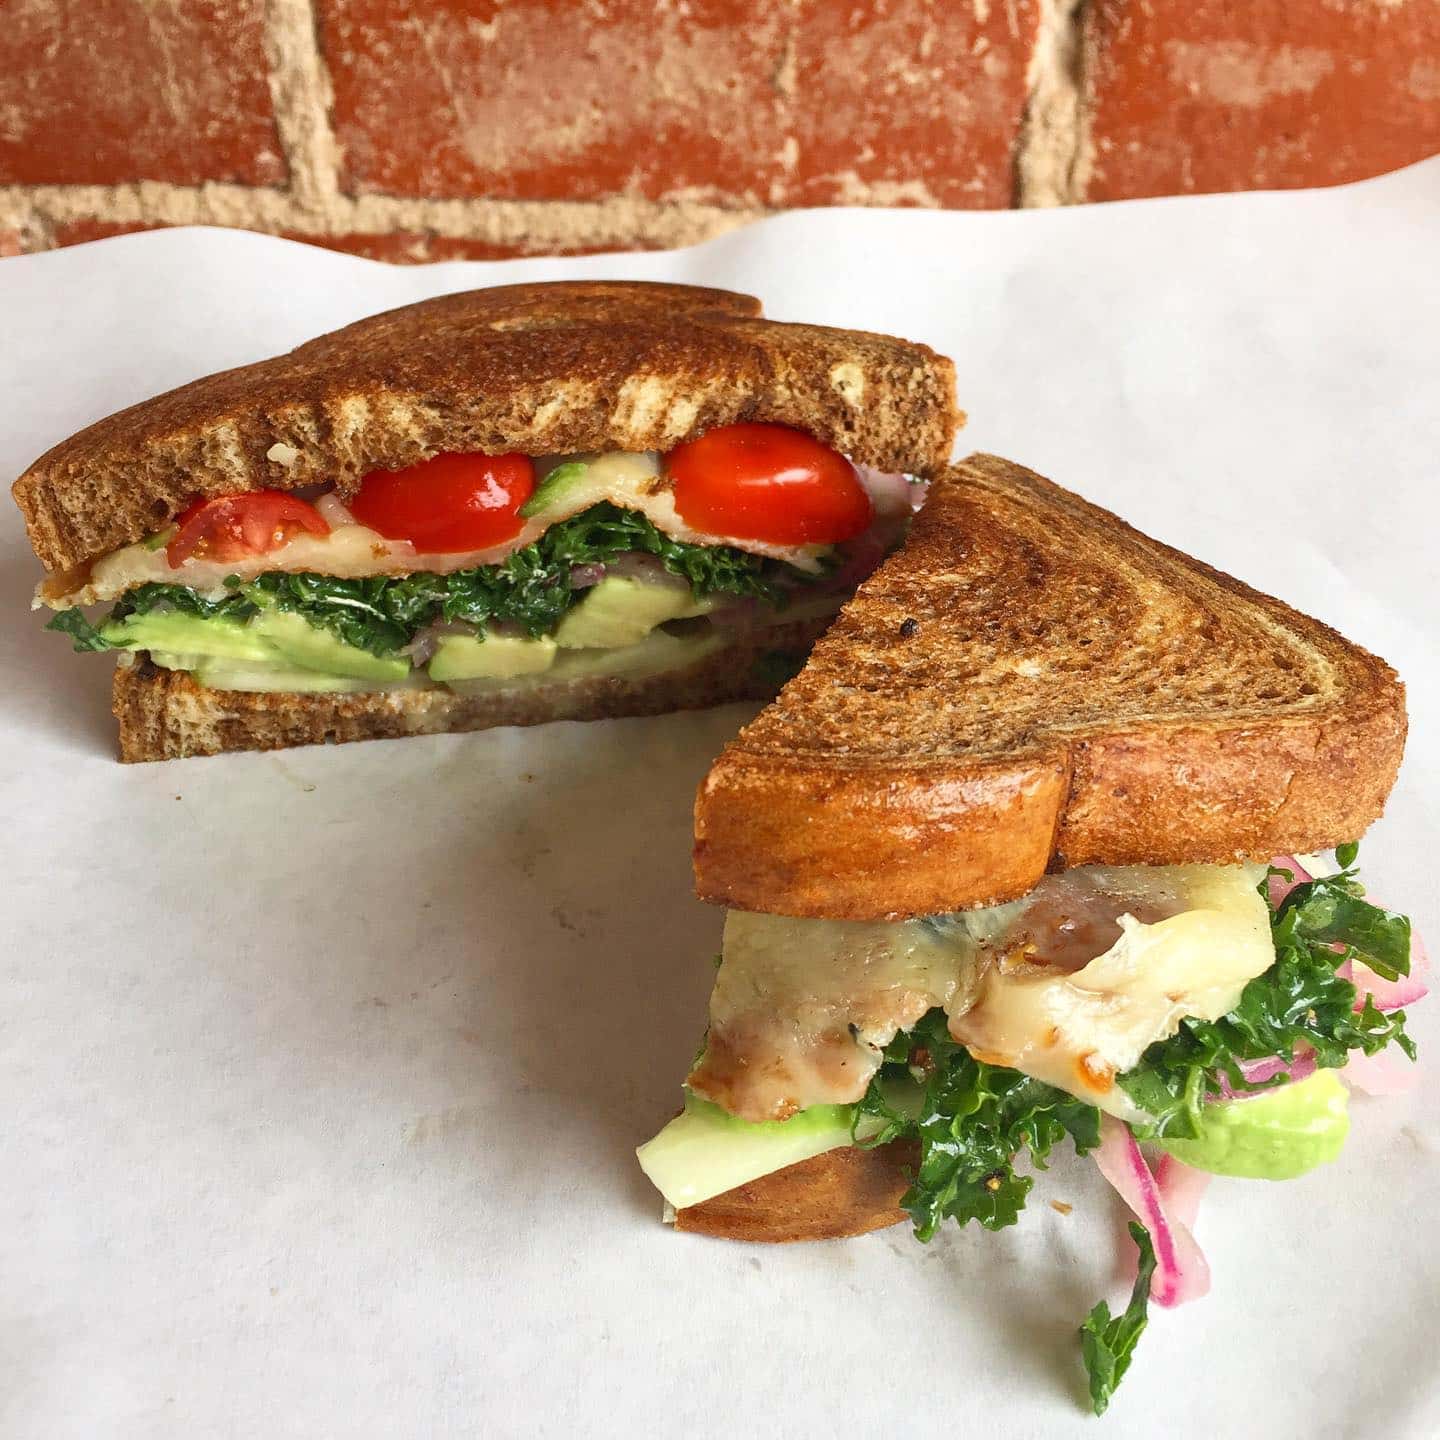 The Flying Stove Kale and Avocado Sandwich